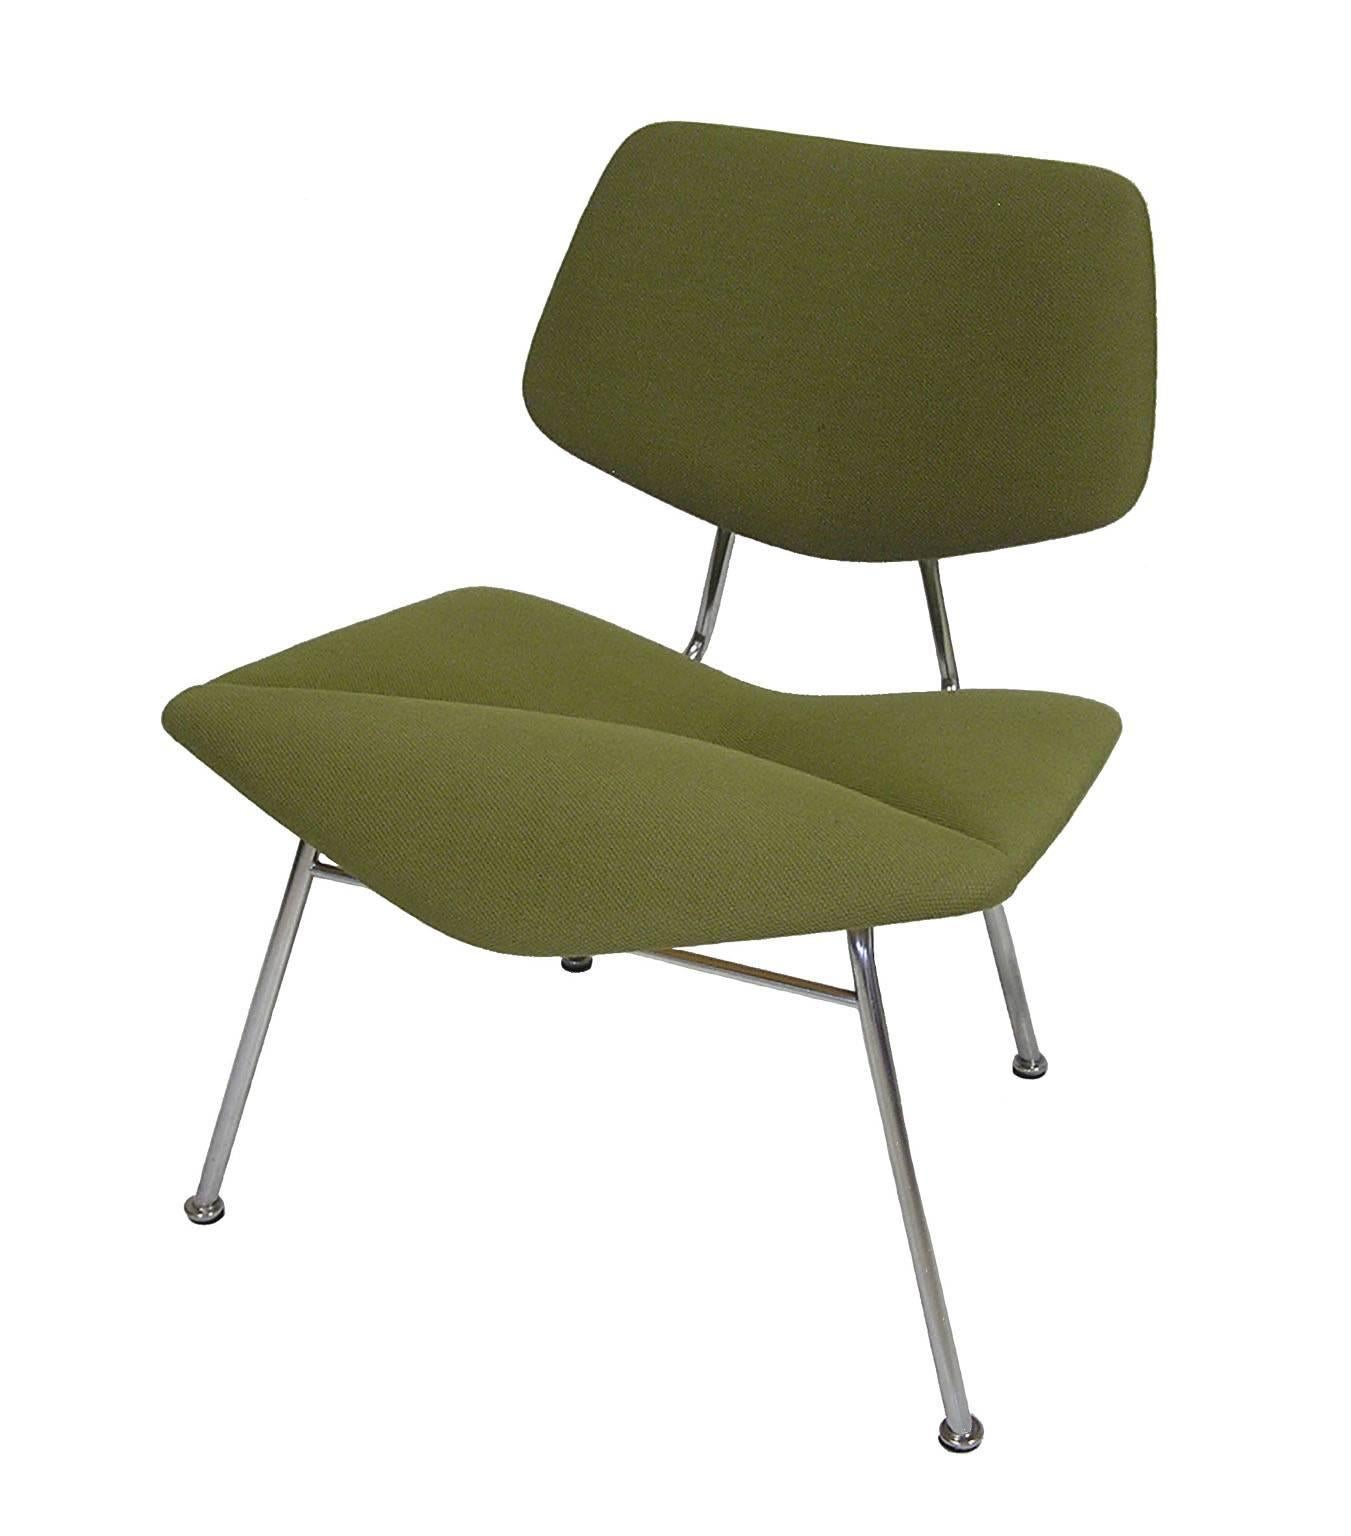 A unique set of four Danish lounge chairs from the 1960s Mid-Century Modern era by Vermund Larsen for VL Furniture of Denmark. Features a stylish low form with a chromed steel tubular frame, bent wood shell and original Kvadrat upholstery. Very